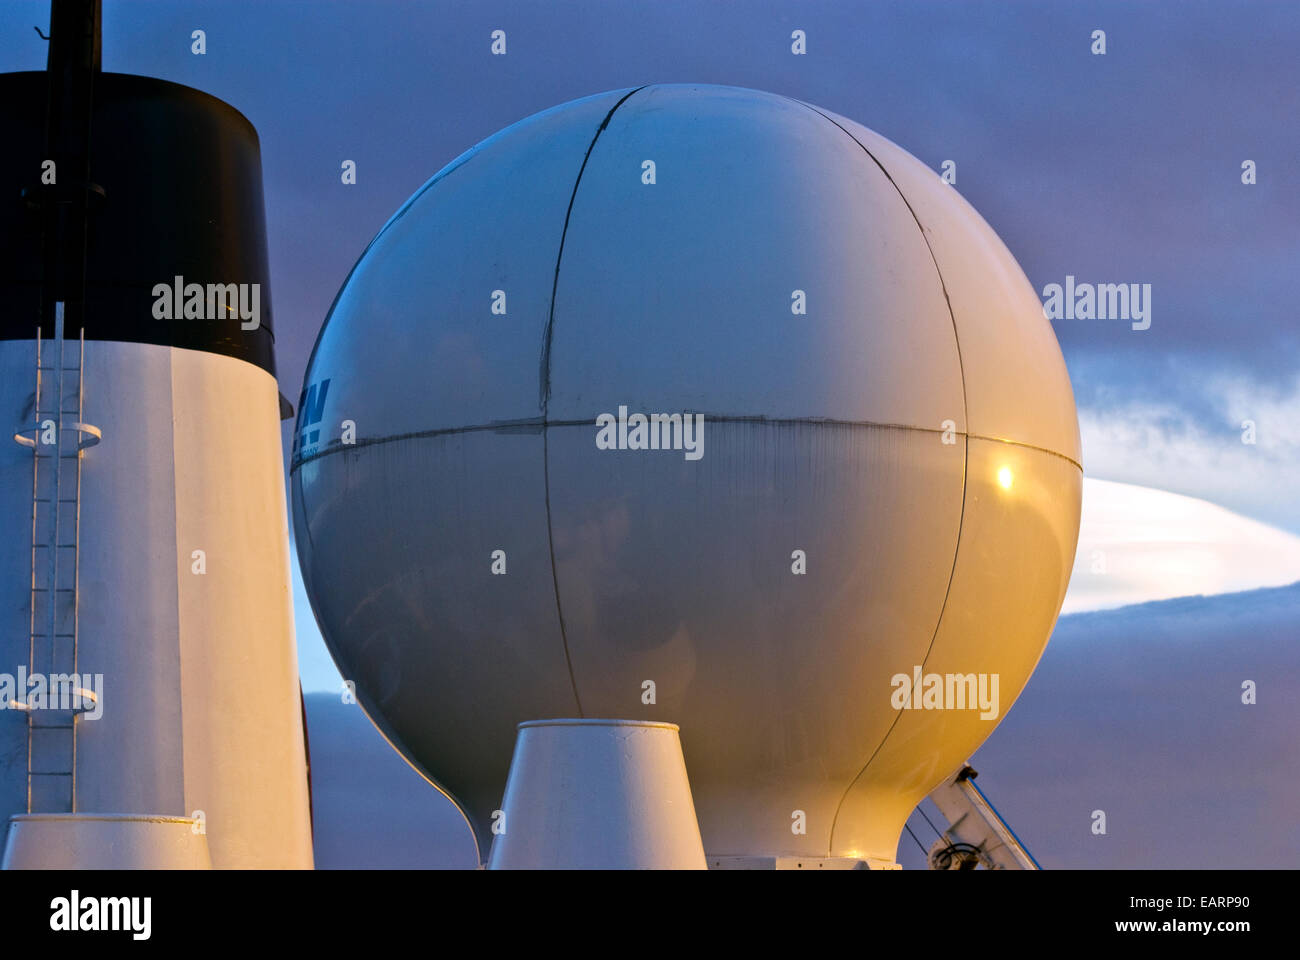 The polished dome of an Antarctic ship's satellite communication orb. Stock Photo